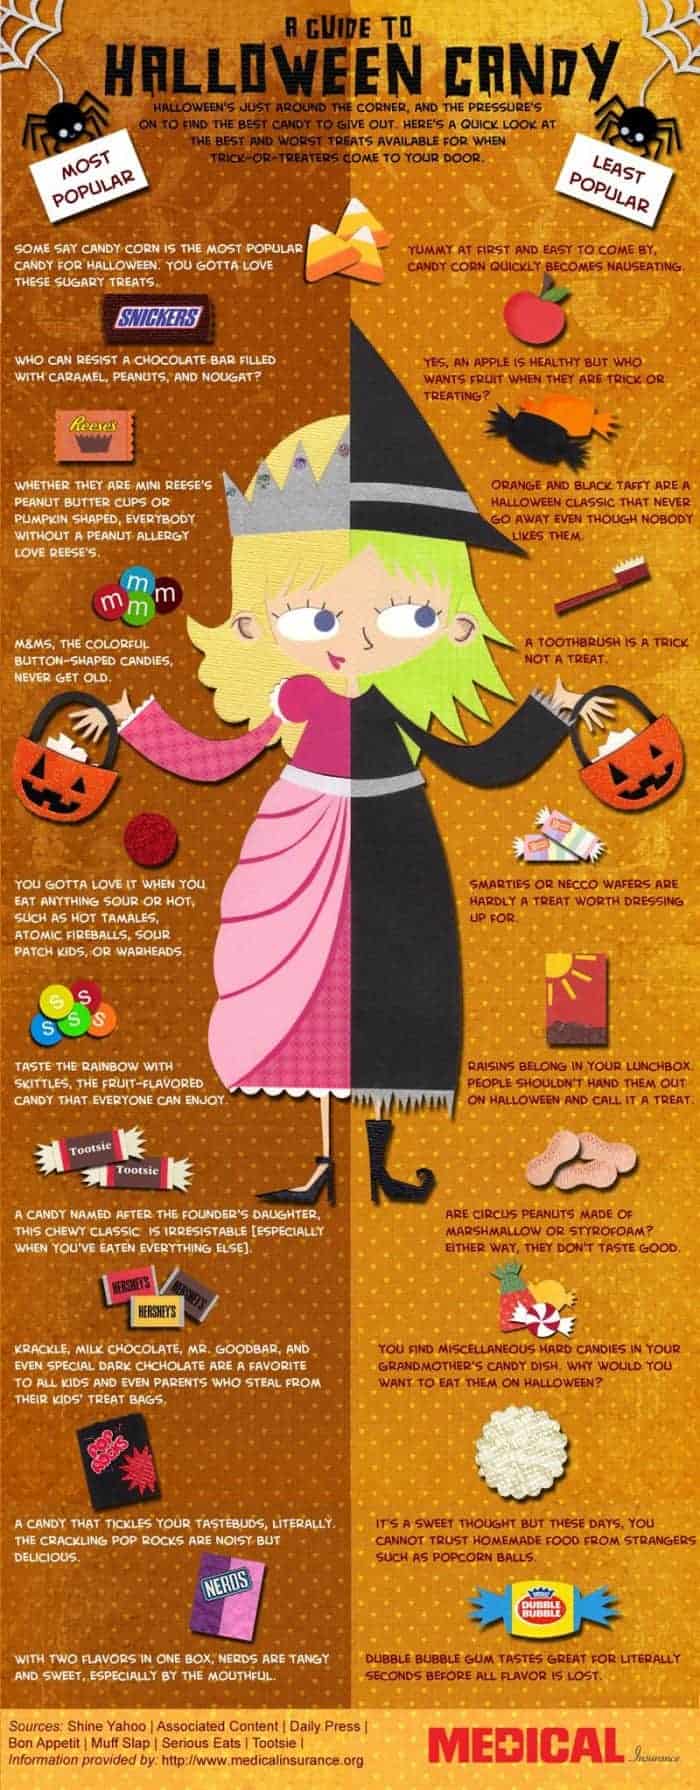 A Guide To Halloween Candy